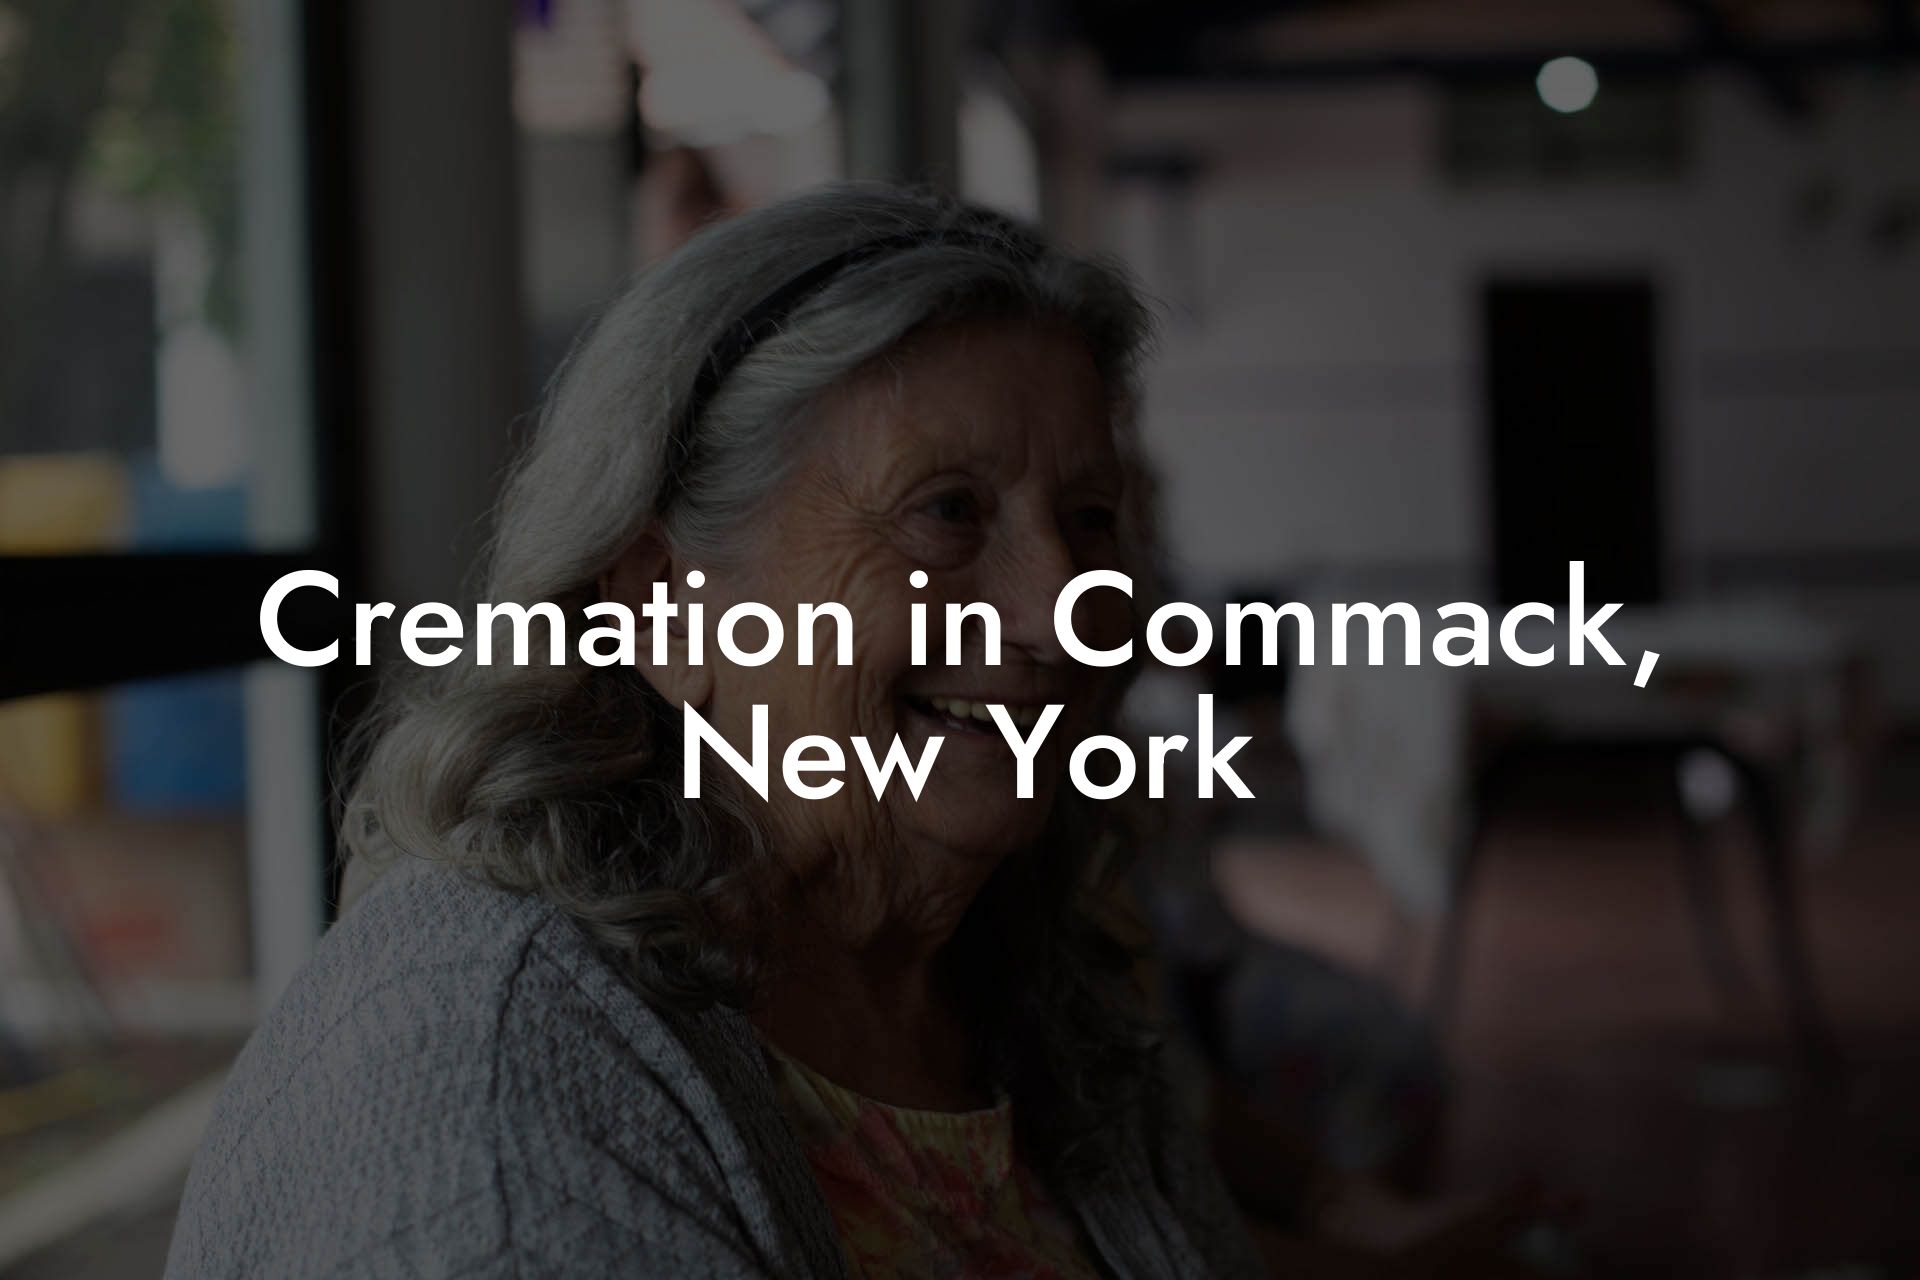 Cremation in Commack, New York